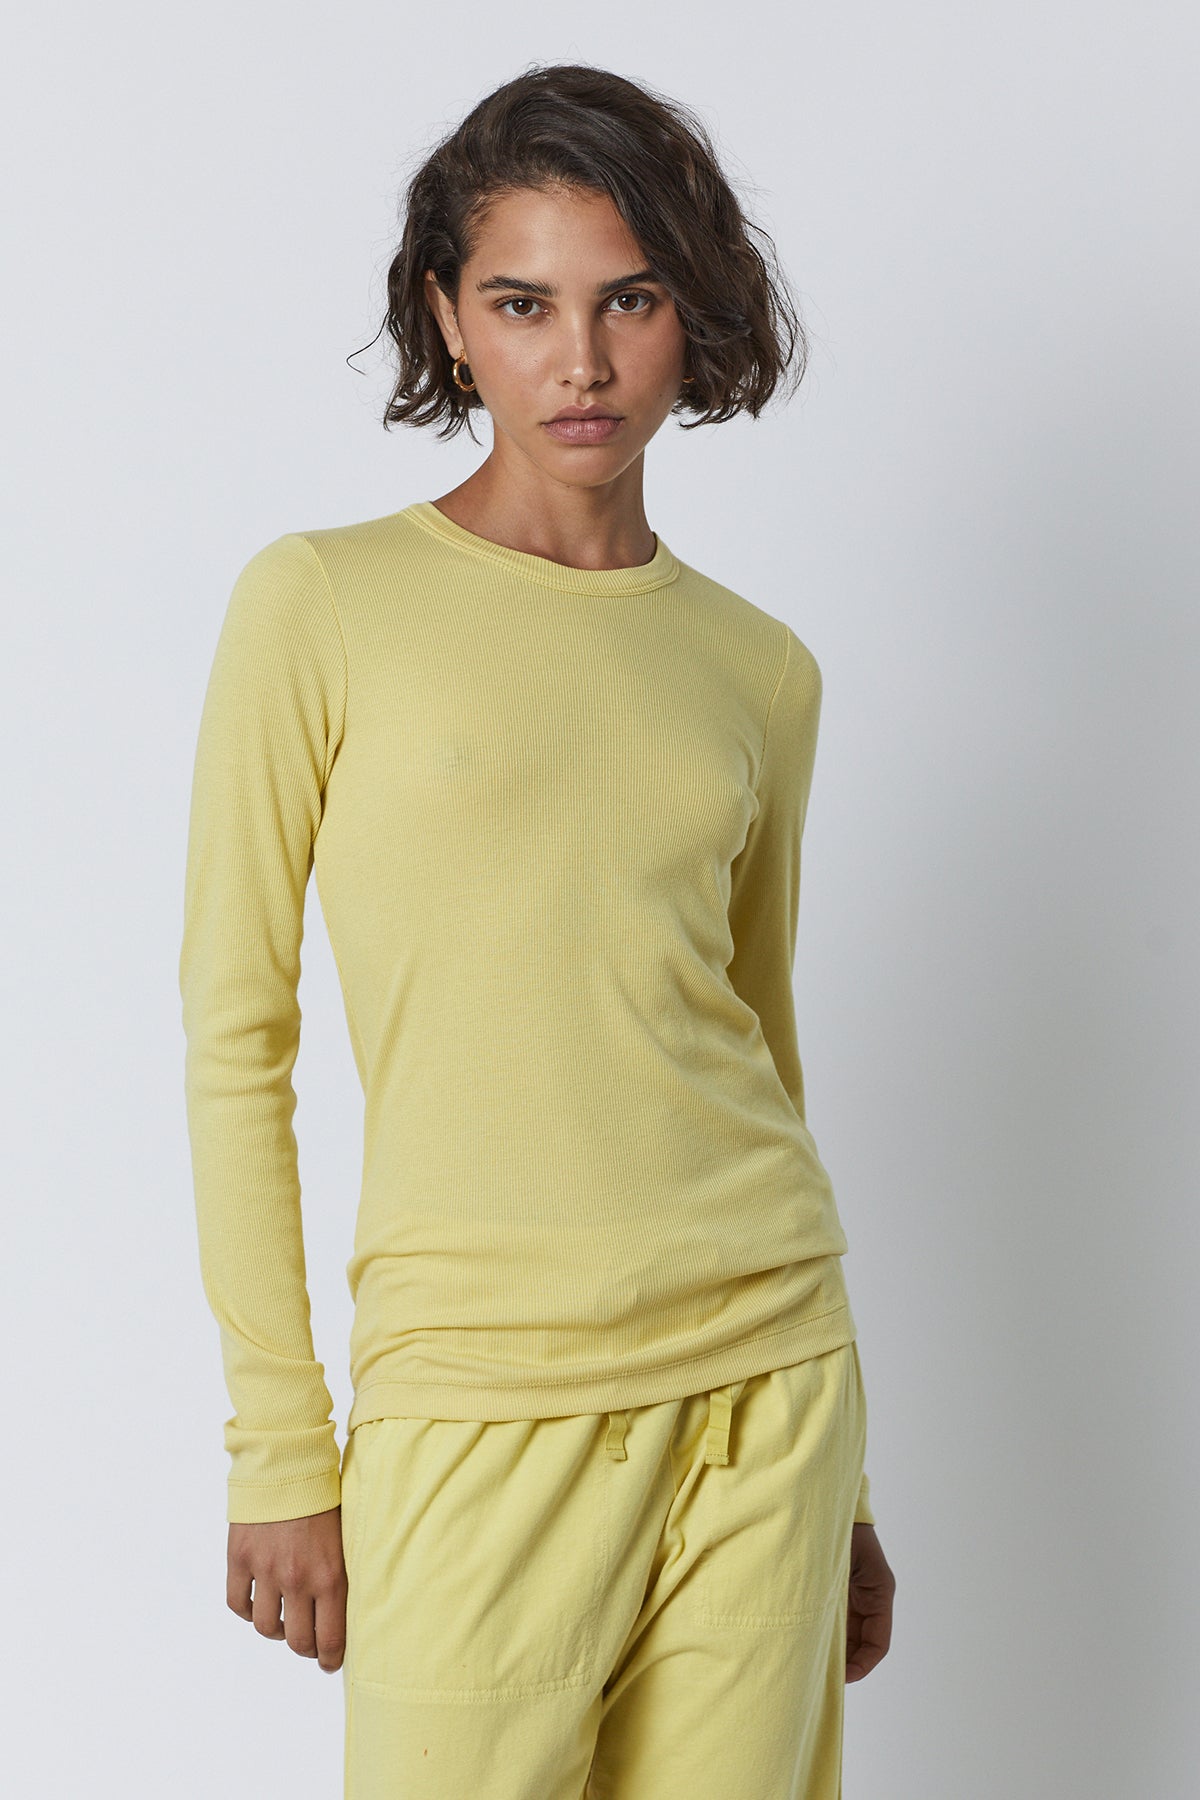 Camino Tee in soft lemon yellow with Pismo pant front-26002801000641